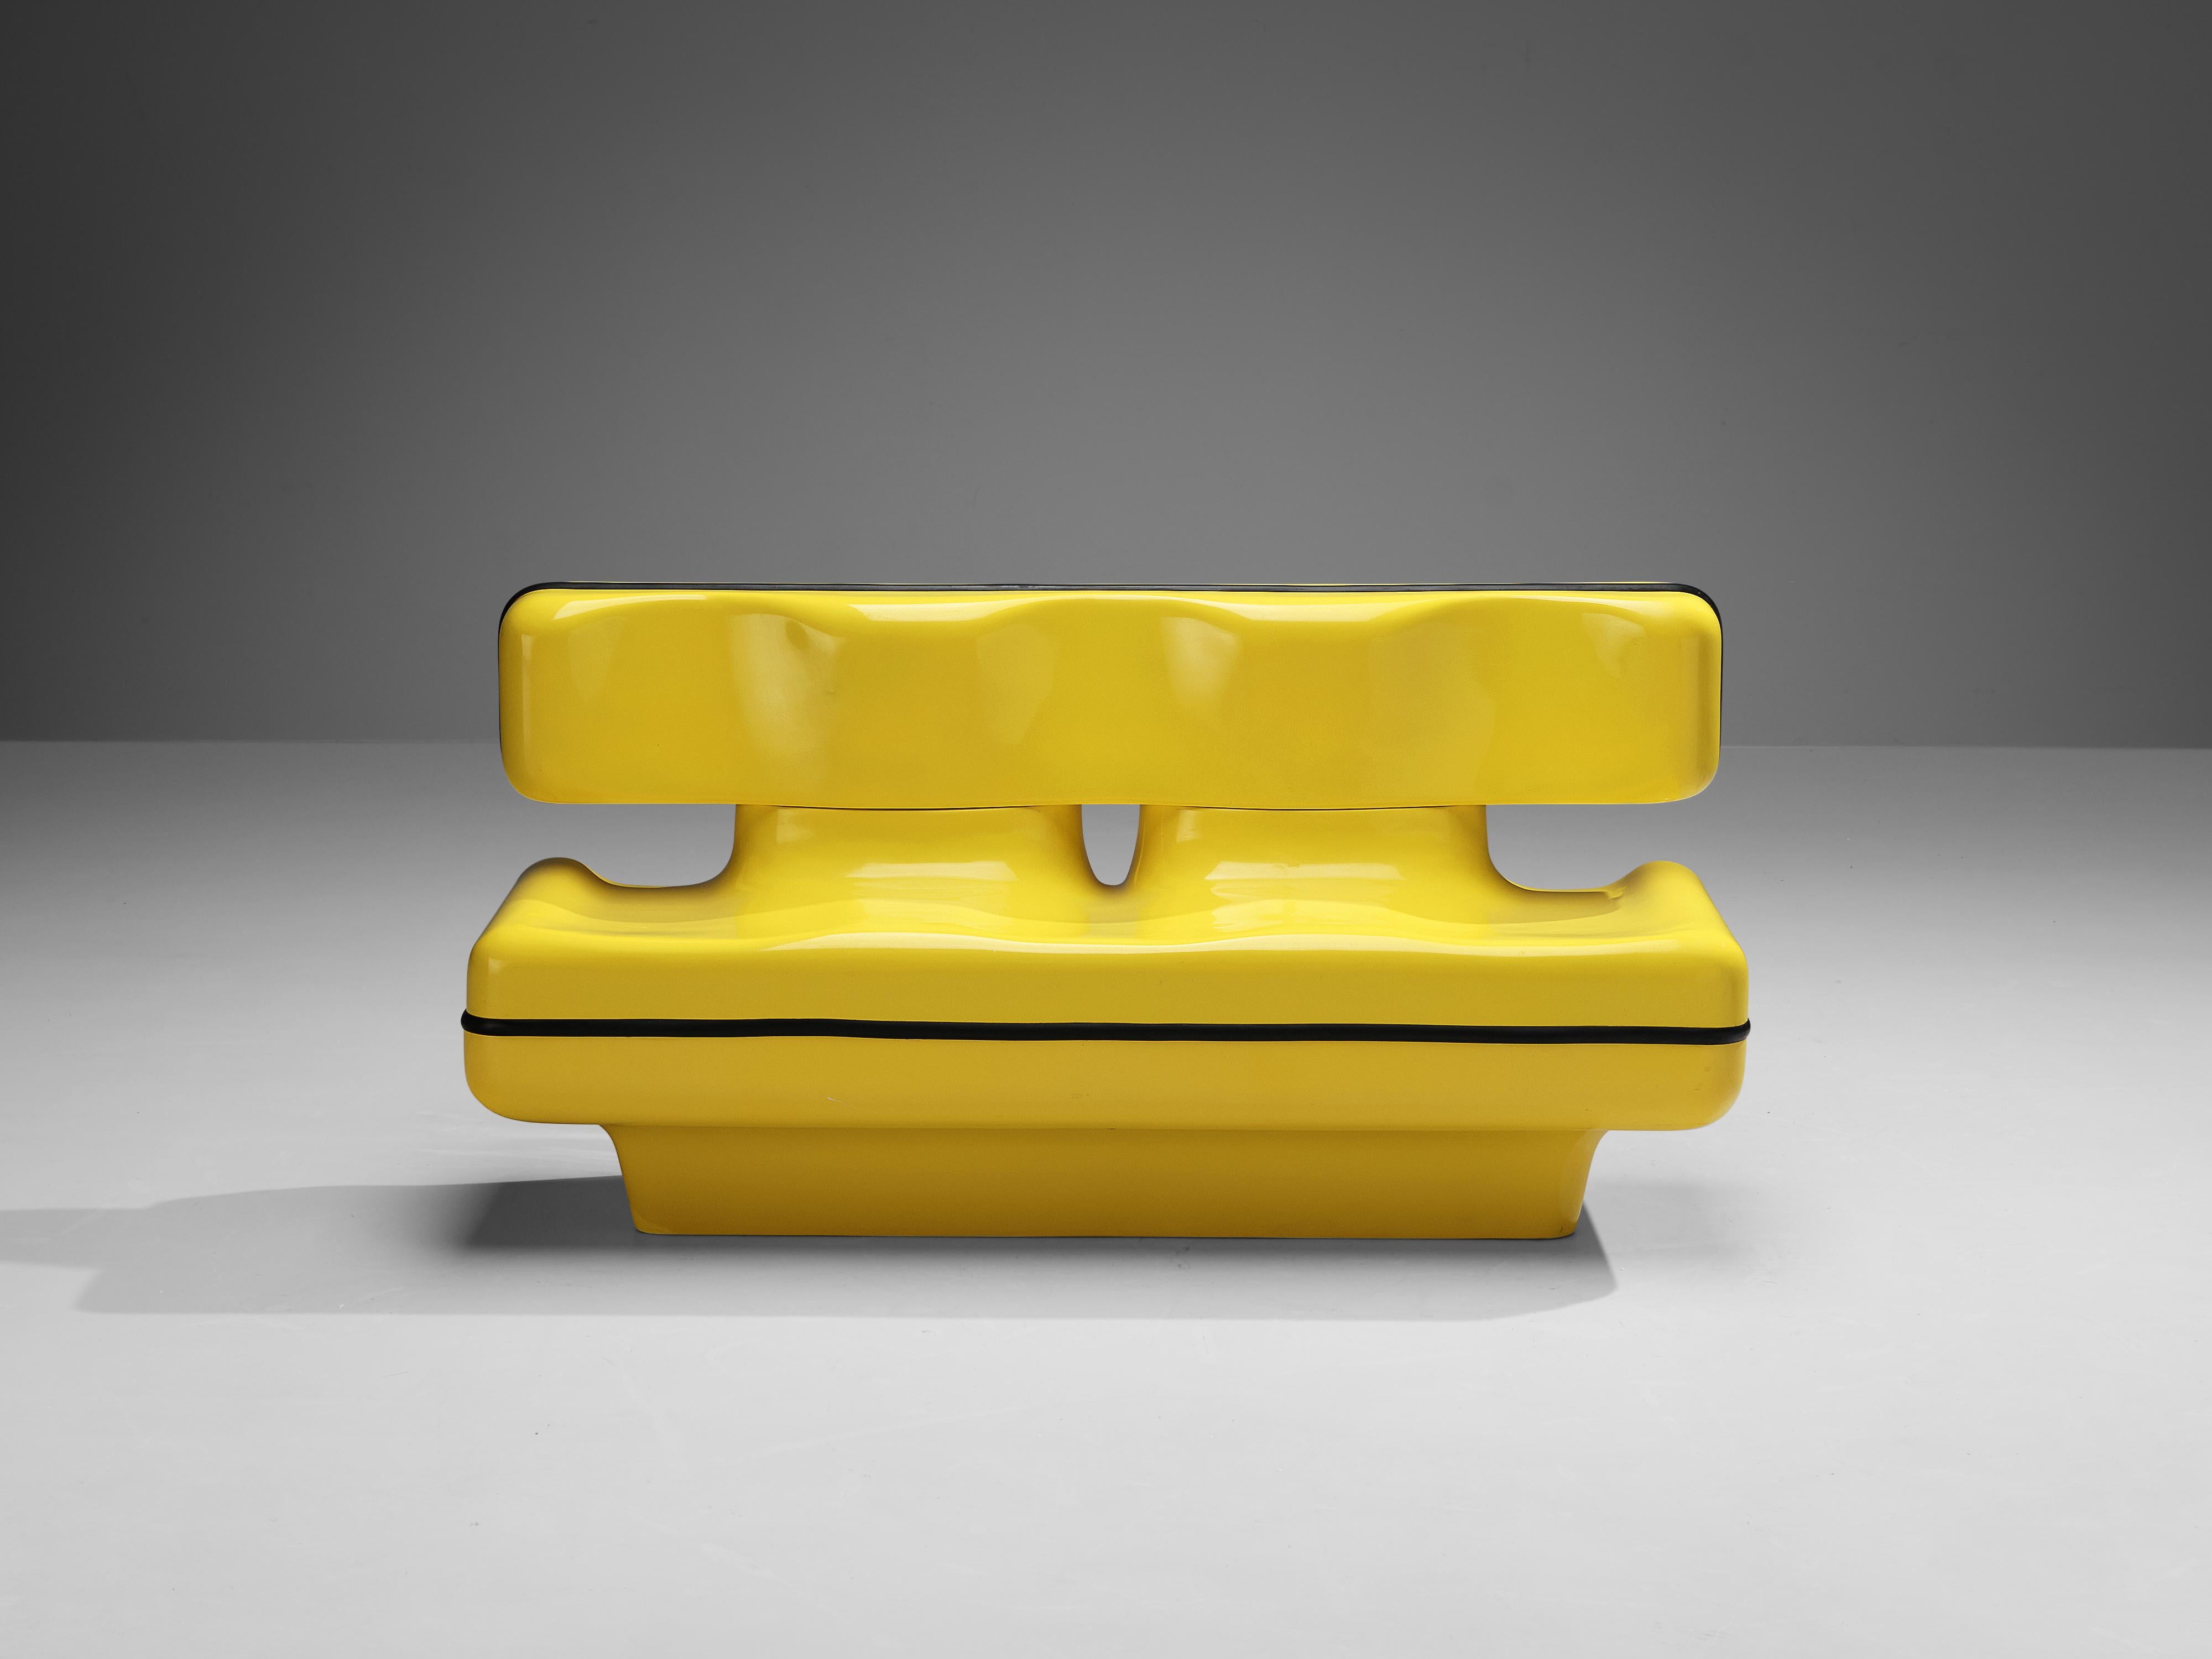 Dominique Prevost & Claude Favriau for Édition France Design, sofa or bench, fiberglass, rubber, France, 1970

Made in 1970, this bench or sofa is designed by Dominique Prevost & Claude Favriau for Édition France Design. This piece of furniture is